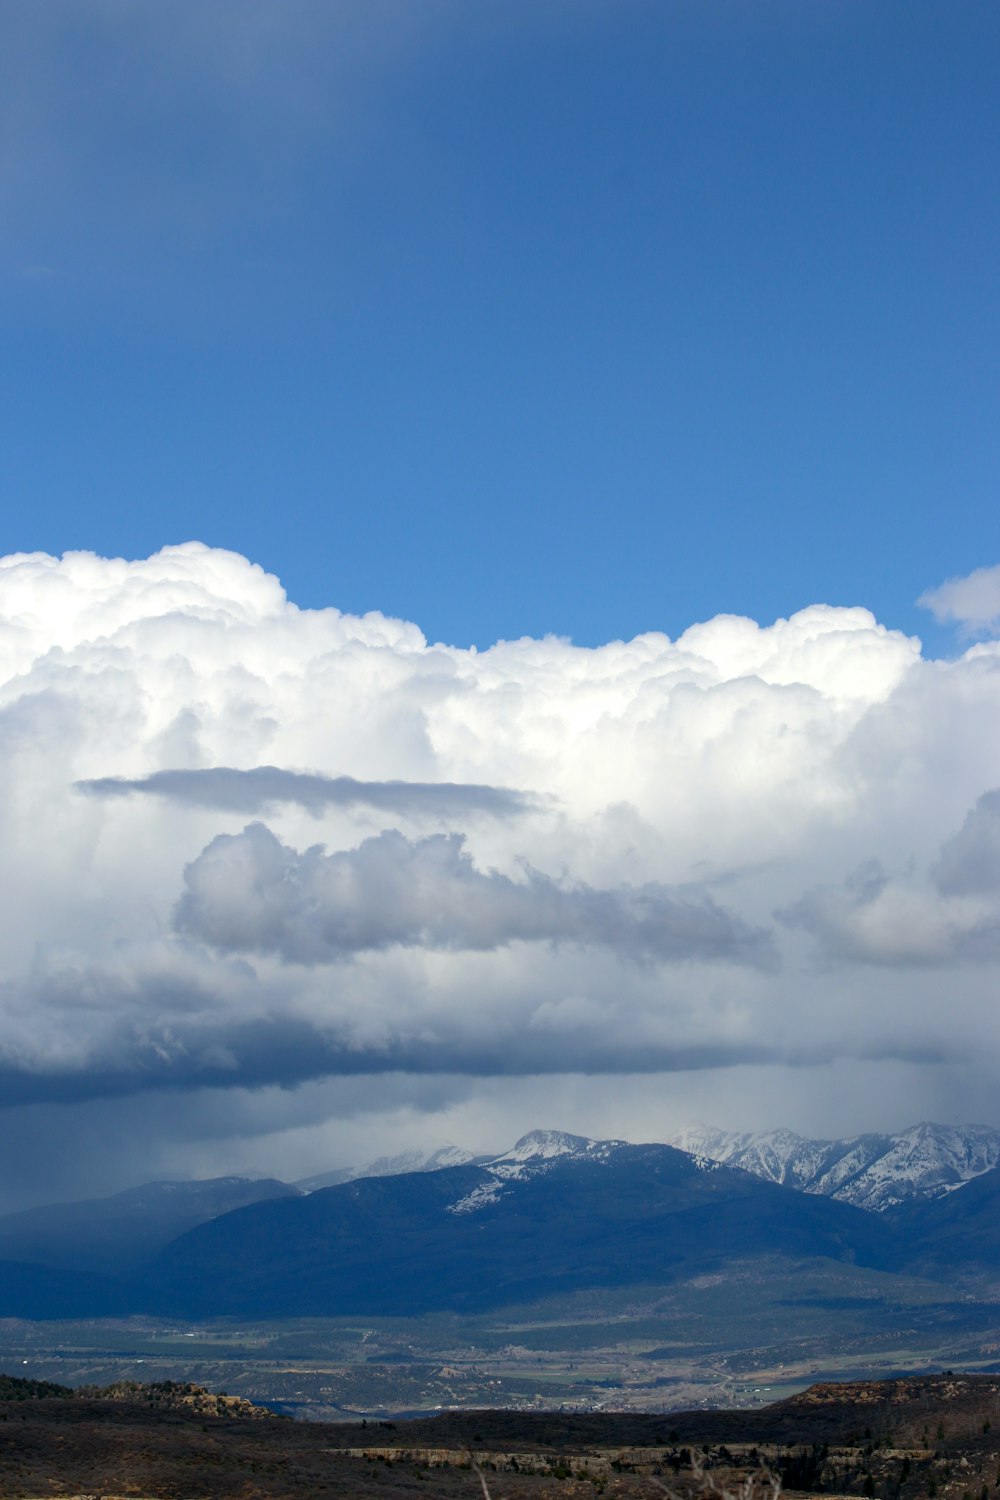 a mountain range under a cloudy sky with mountains in the distance